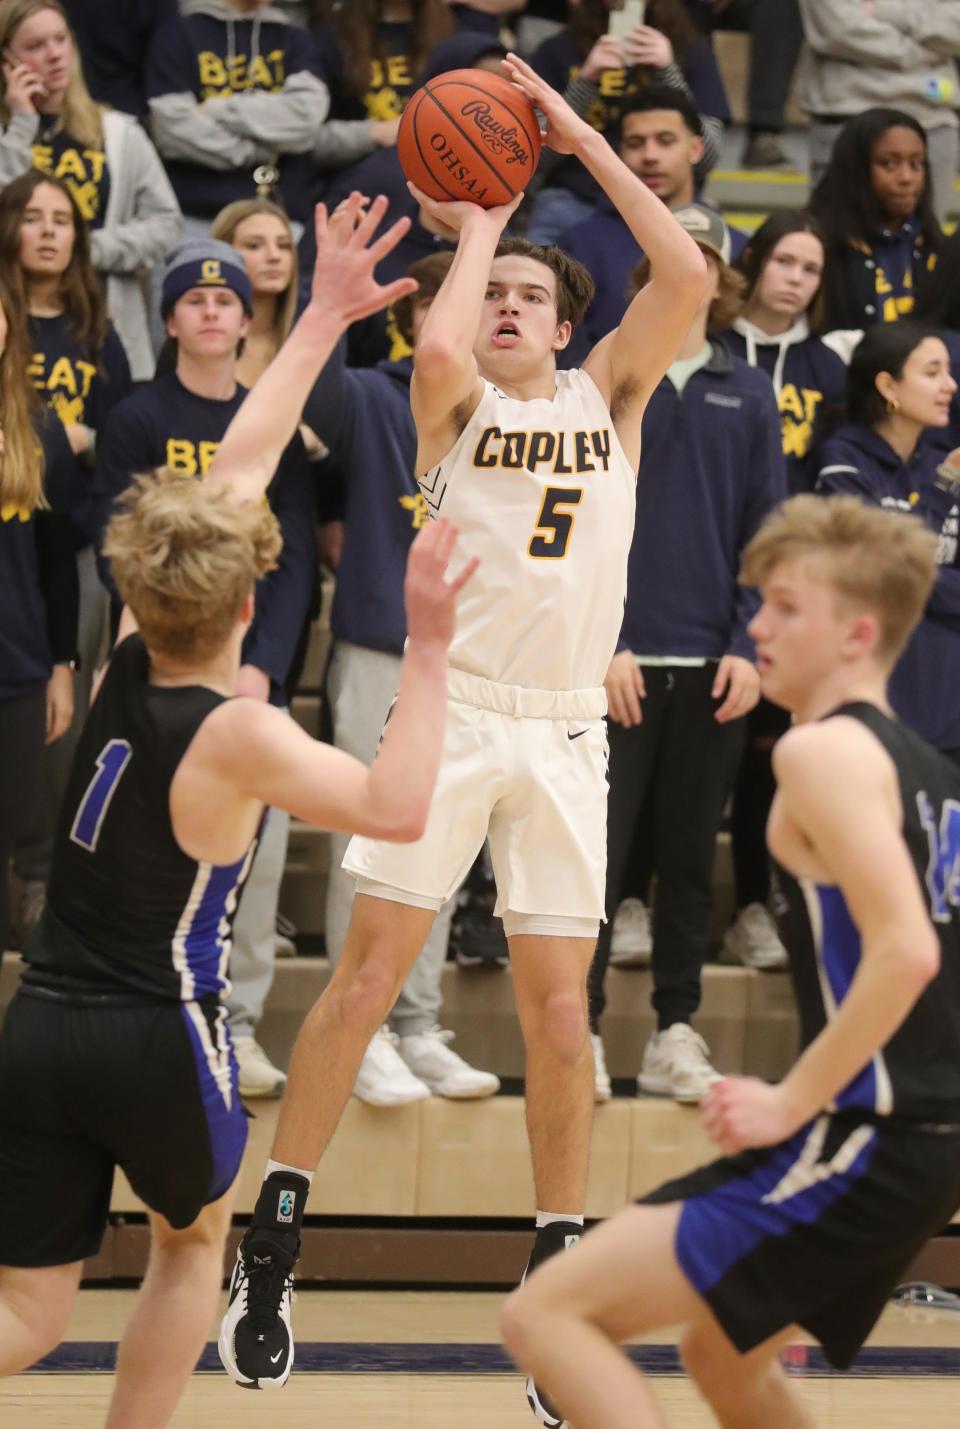 Copley's Trent Wininger puts up a 3-point shot between Revere's Chris Muntean, left, and Baron Bania on Tuesday, Feb. 8, 2022 in Copley.